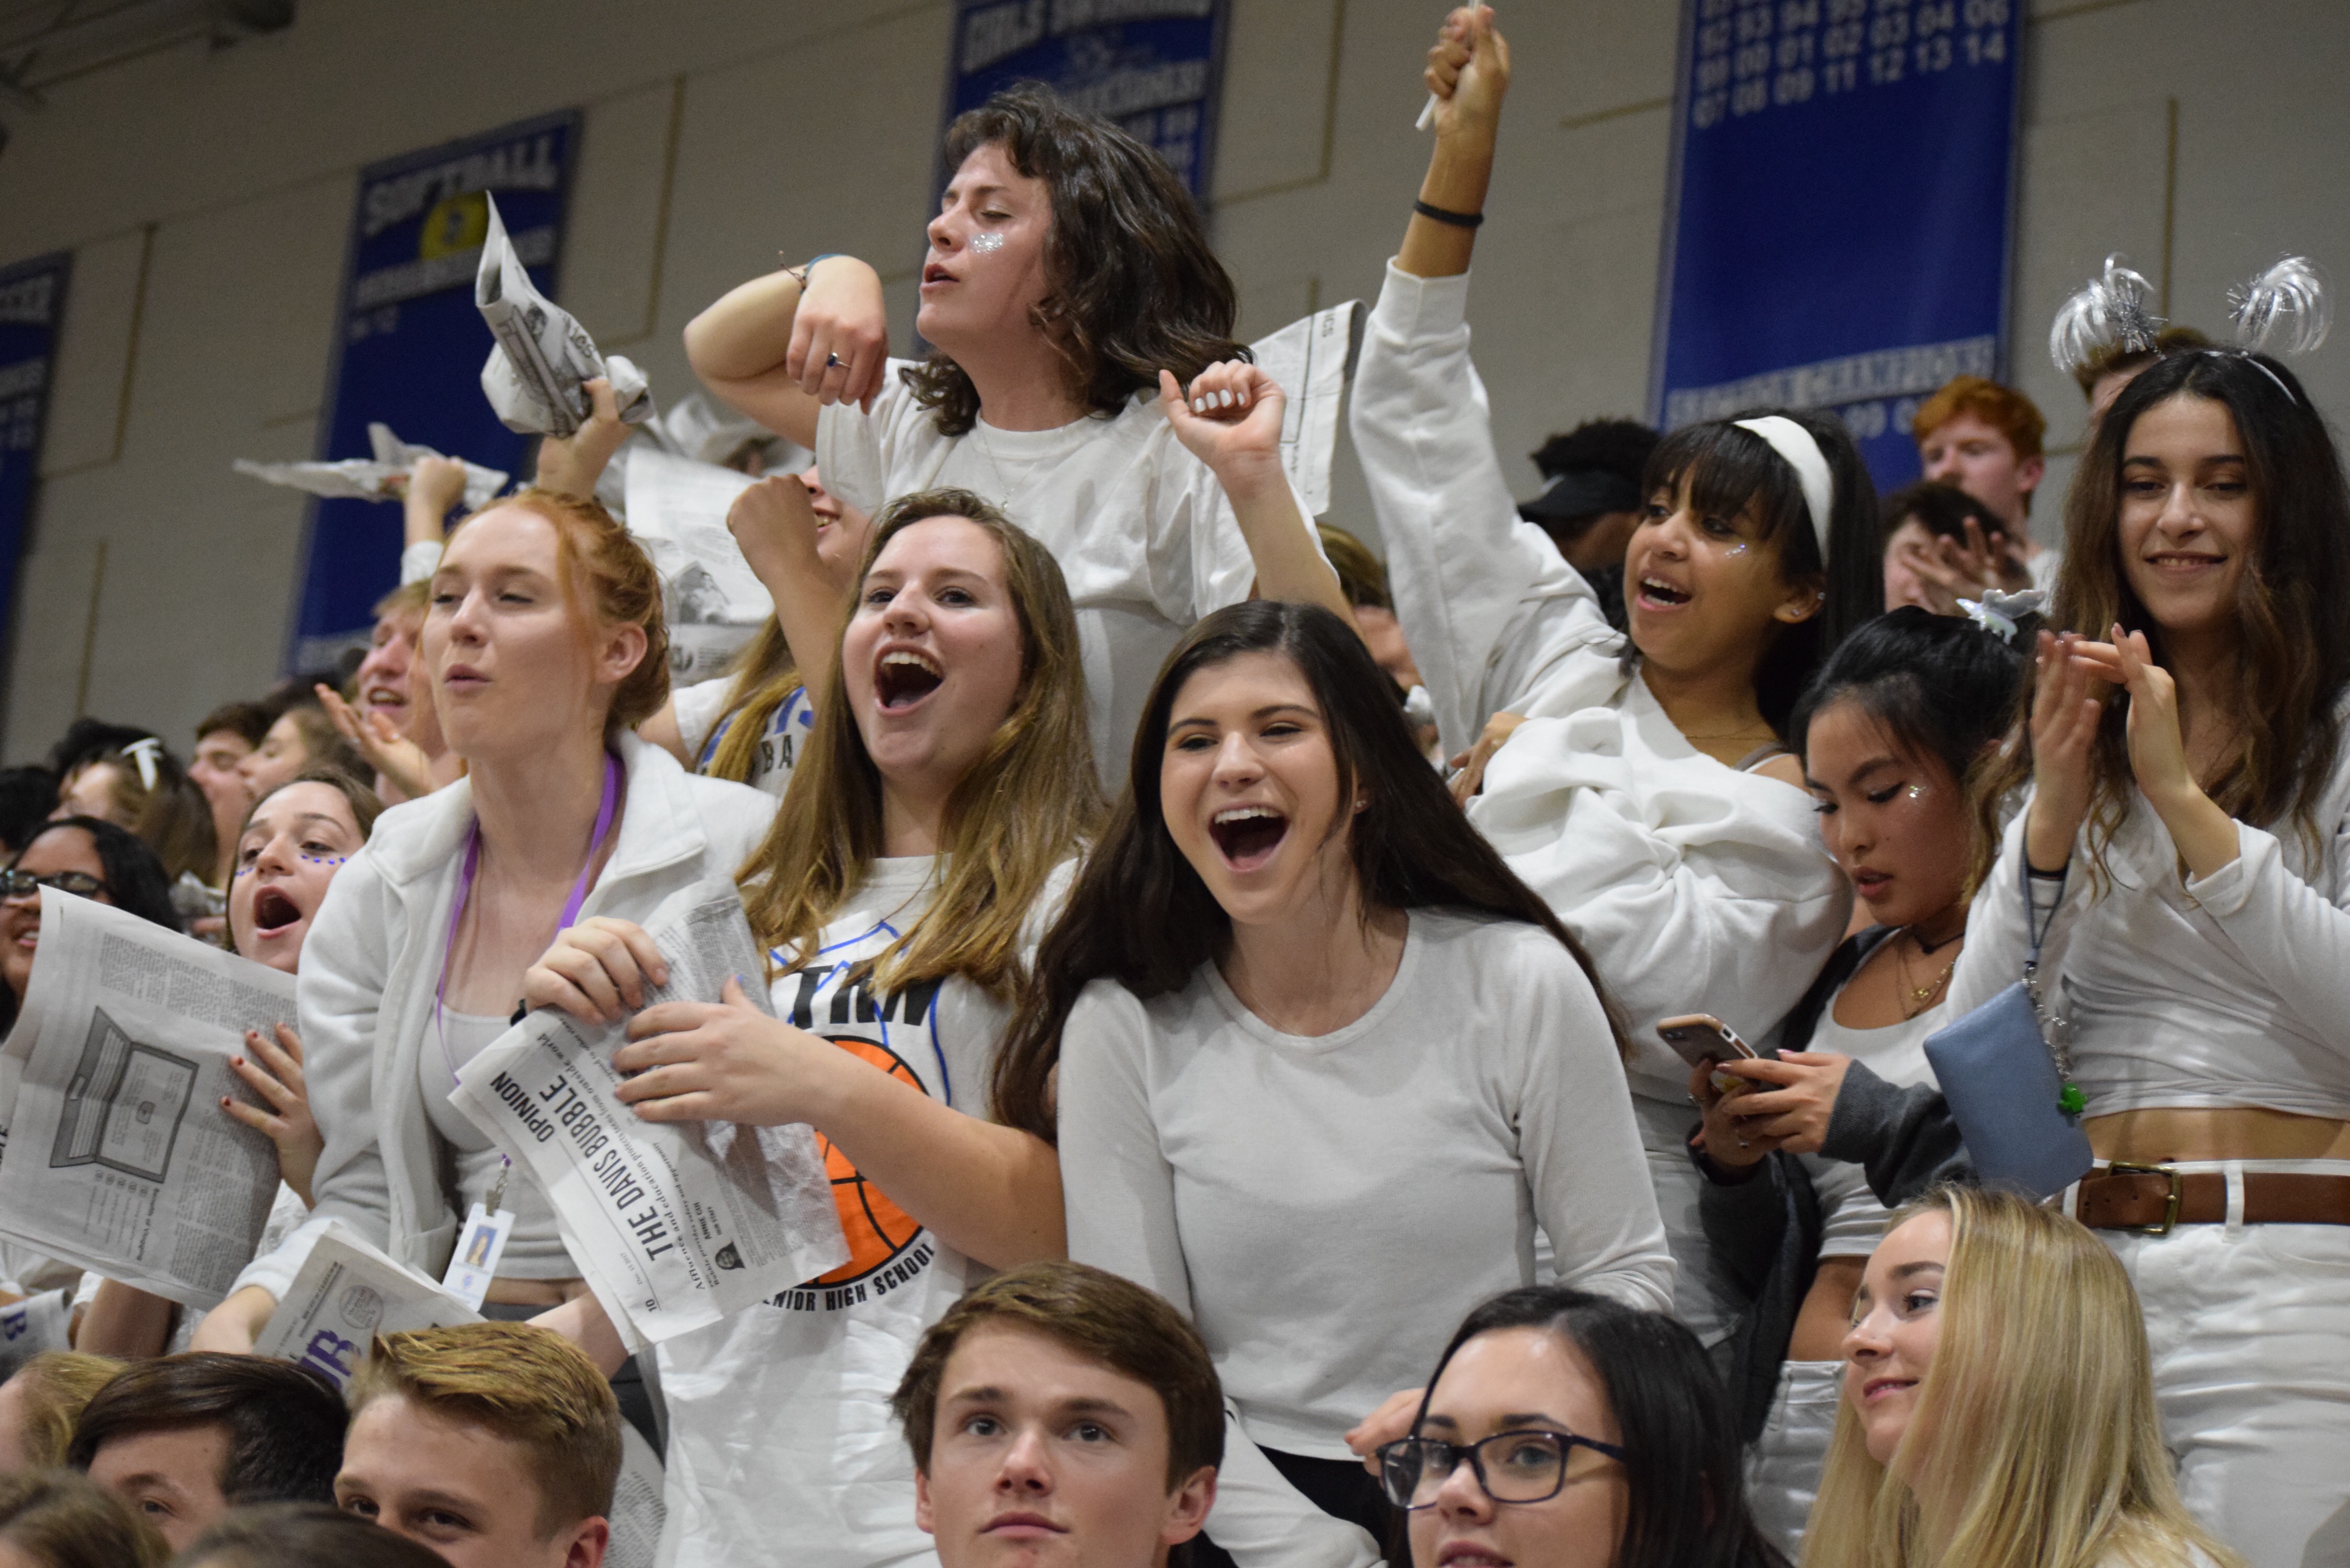 Fans decked out in white cheer from the sidelines. Senior Rayan Tilmatine made addressed fans before the first whistle, asking them to be courteous to the  players and officials on the court.